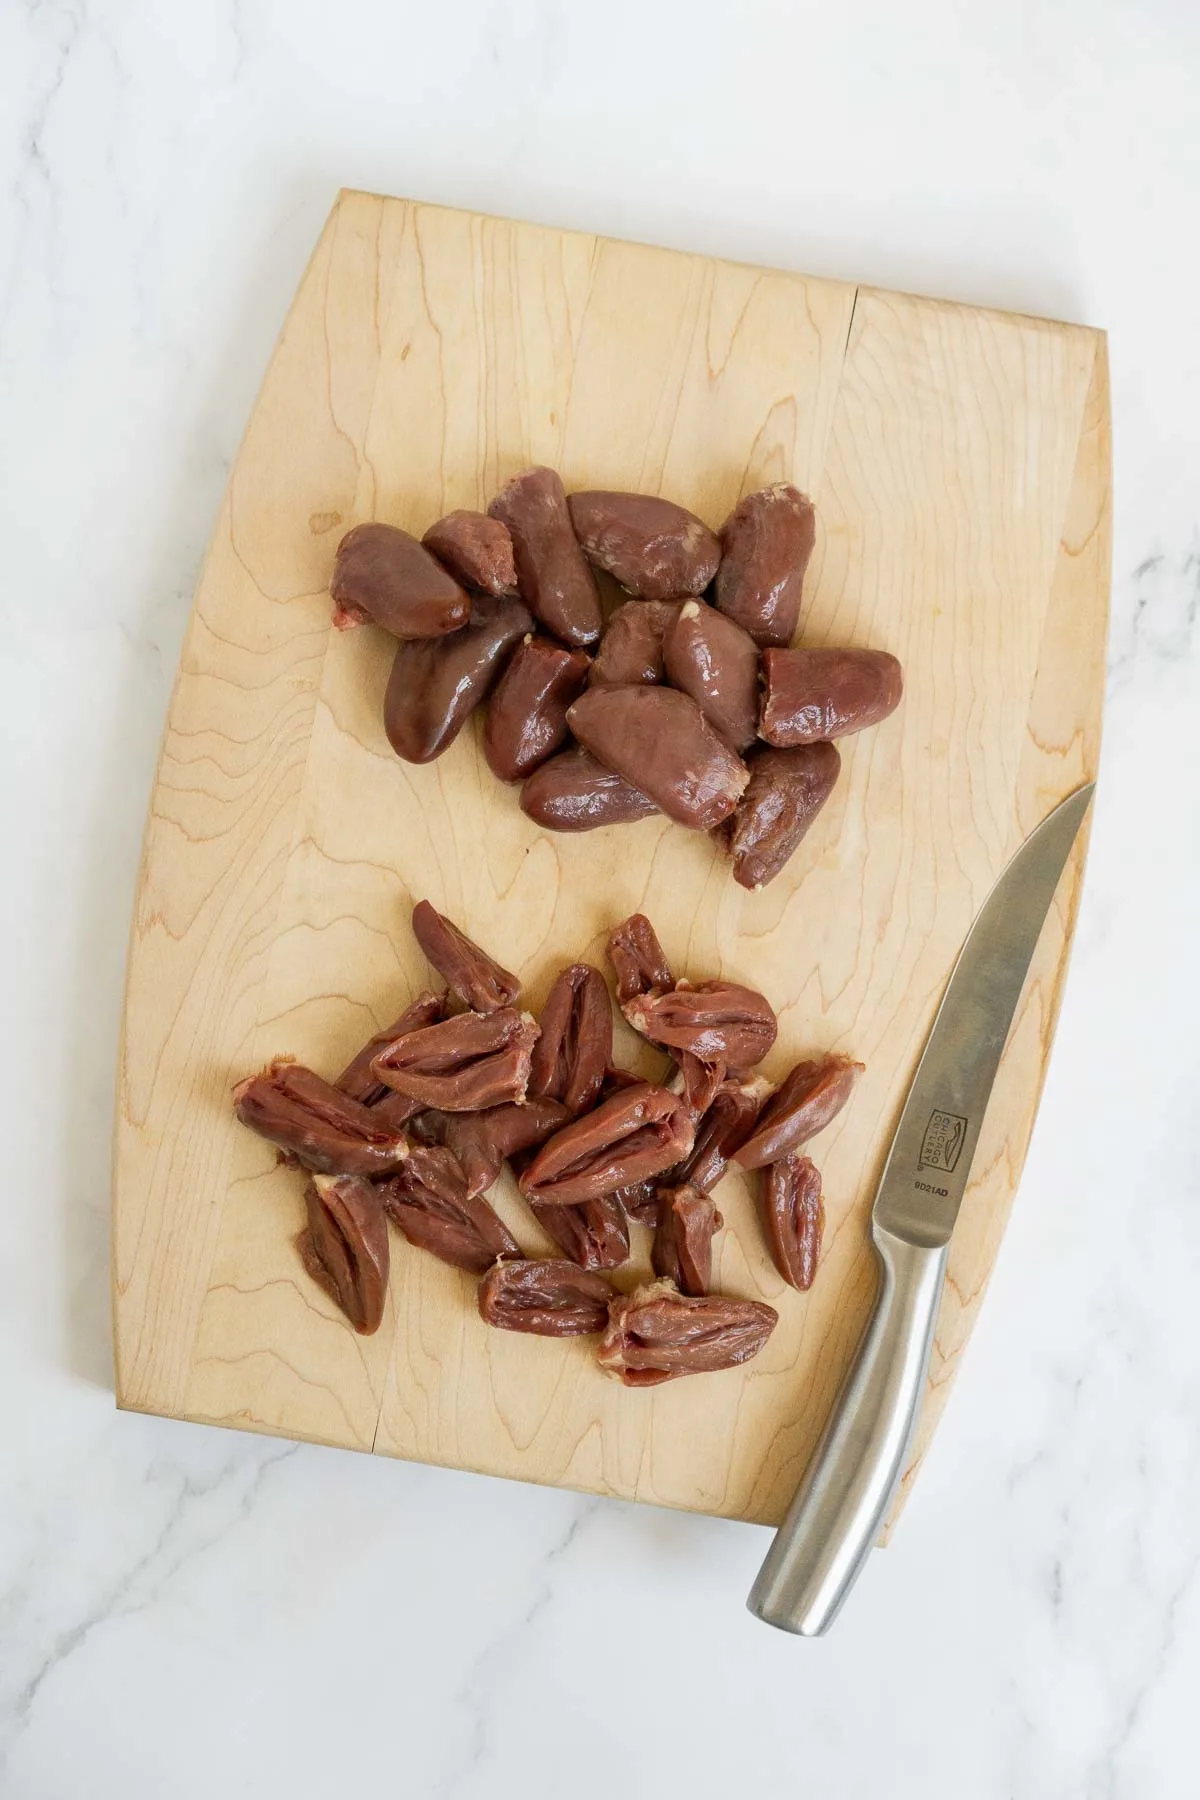 Sliced chicken hearts on a cutting board.